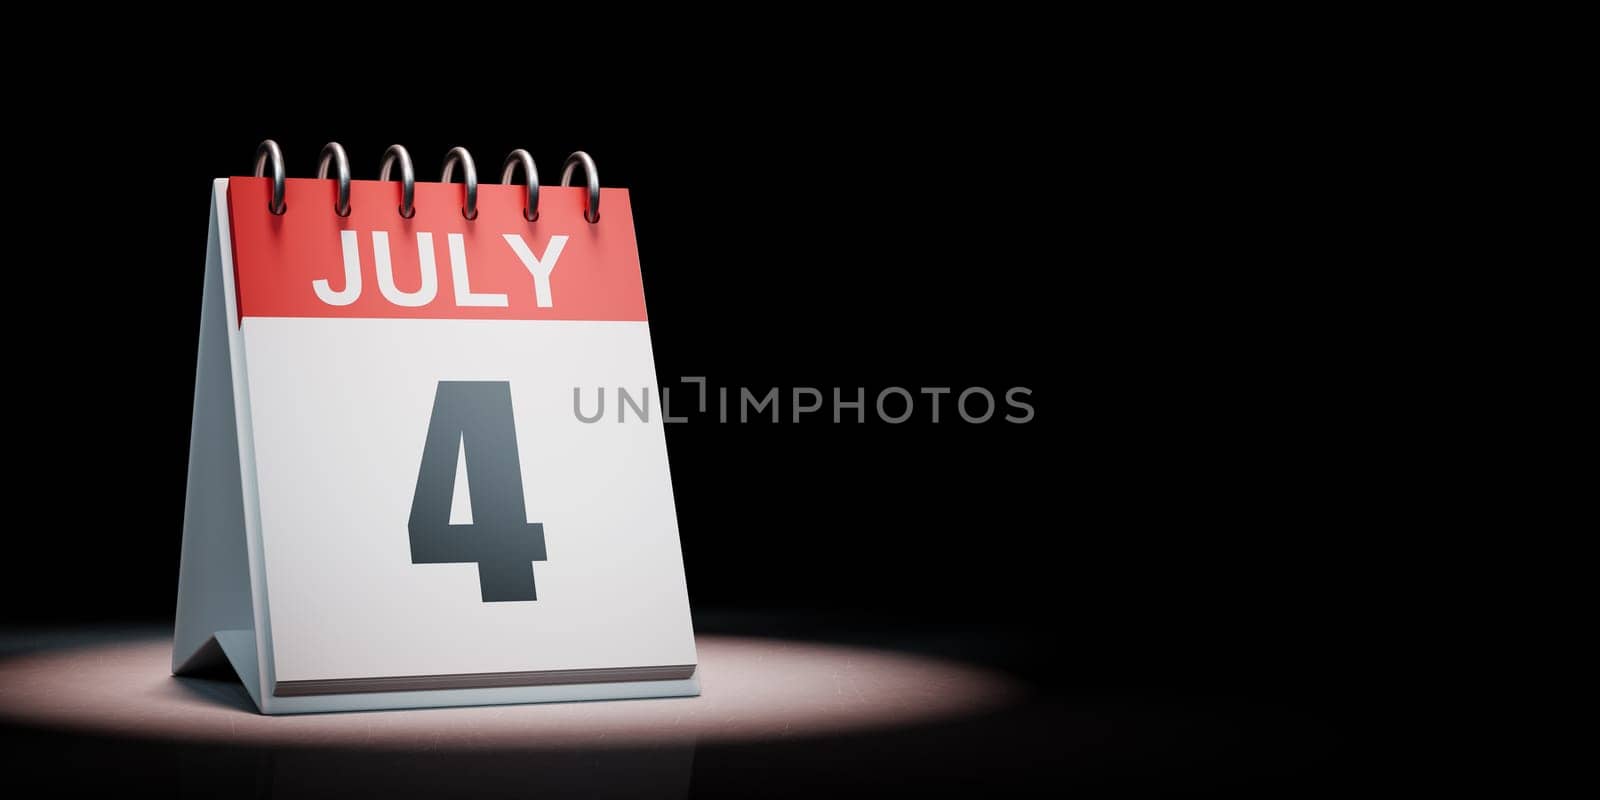 Red and White July 4 Desk Calendar Spotlighted on Black Background with Copy Space 3D Illustration